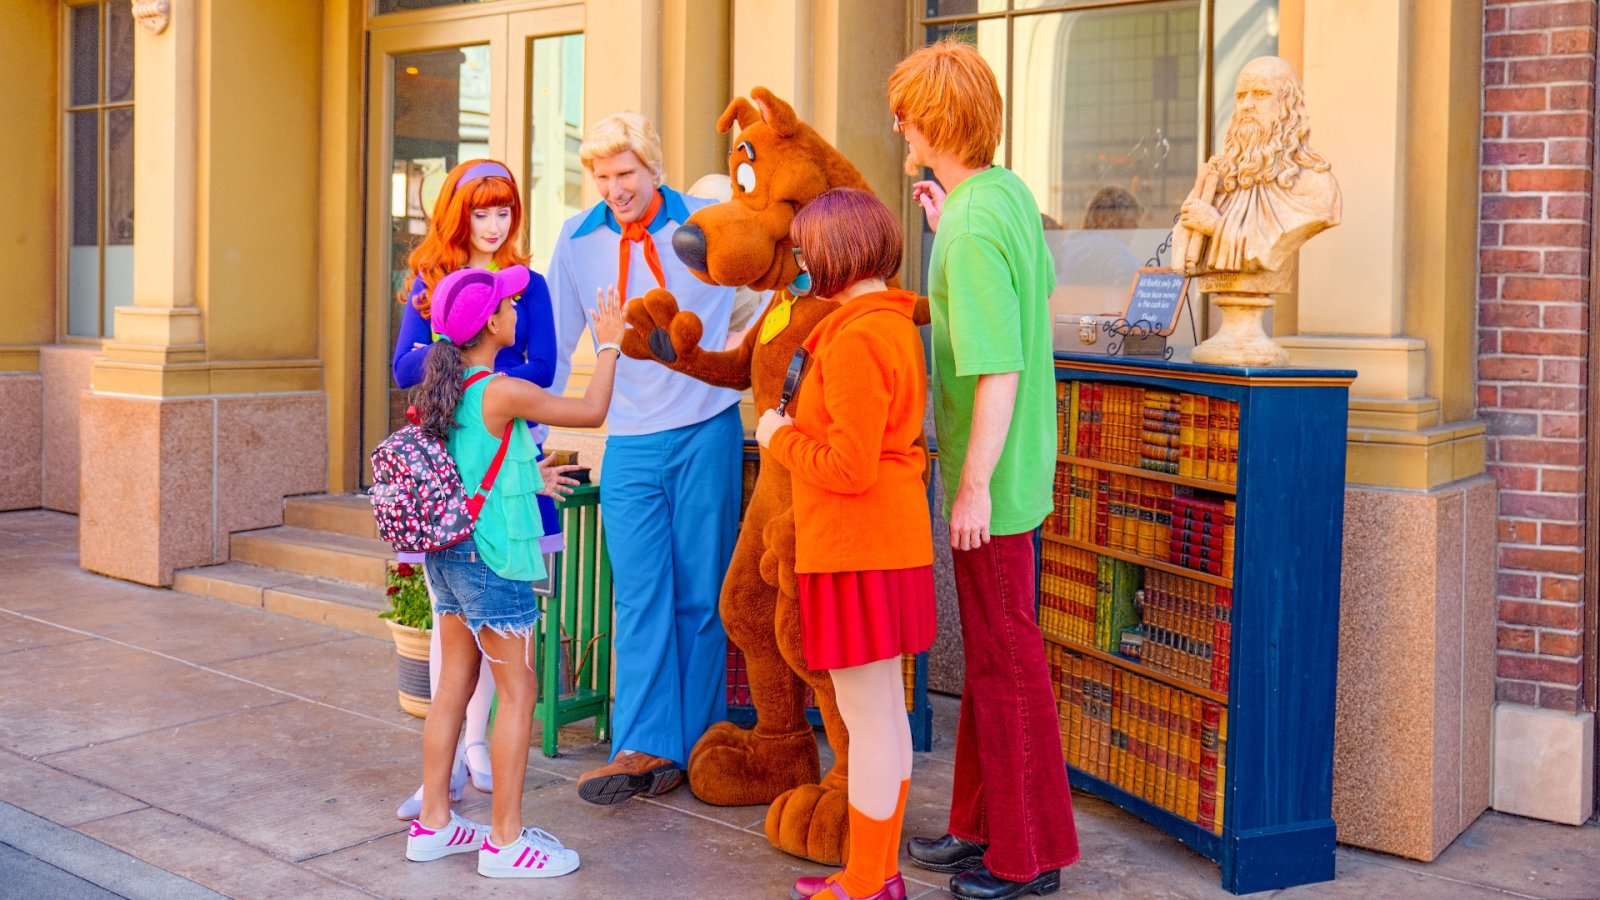 HBO’s latest show that taps into the Scooby-Doo world got viewers talking - but why?